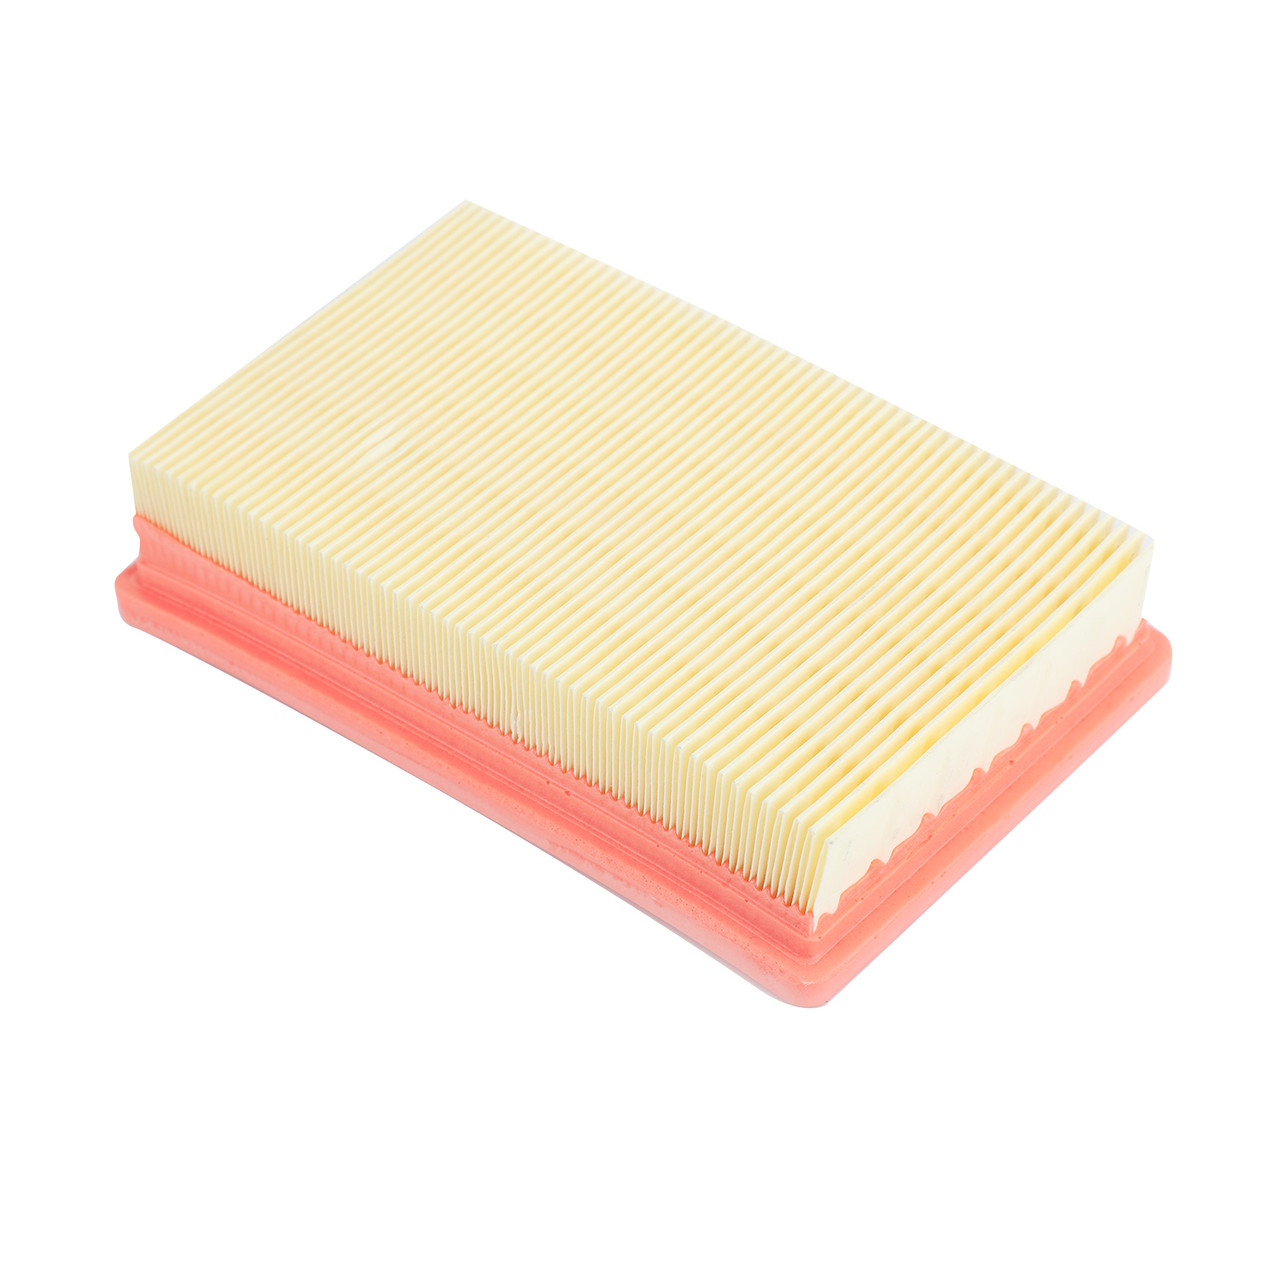 Air Filter Element for BWM R1200GS K50 11-18 R1250GS 17-18 R1250GS 17-19 R1200RT R1200R 13-18 R1250RS 18-19 Yellow